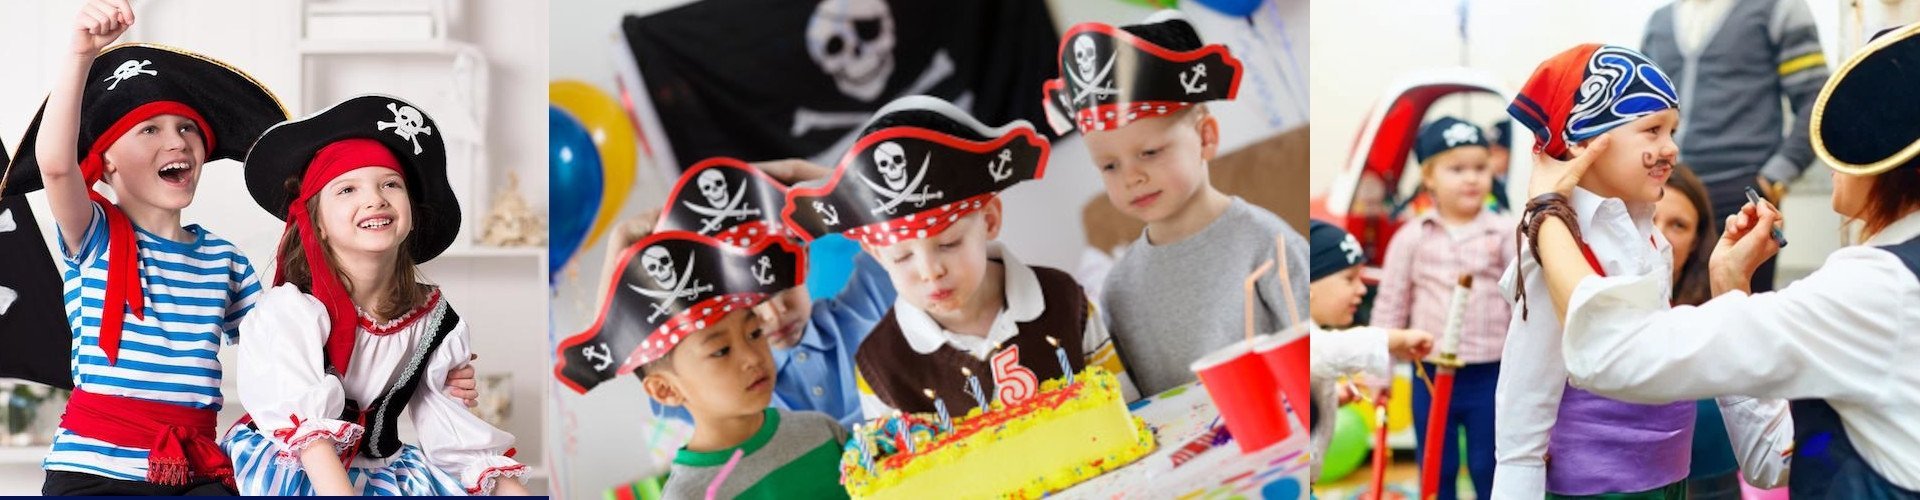 pirate party for kids